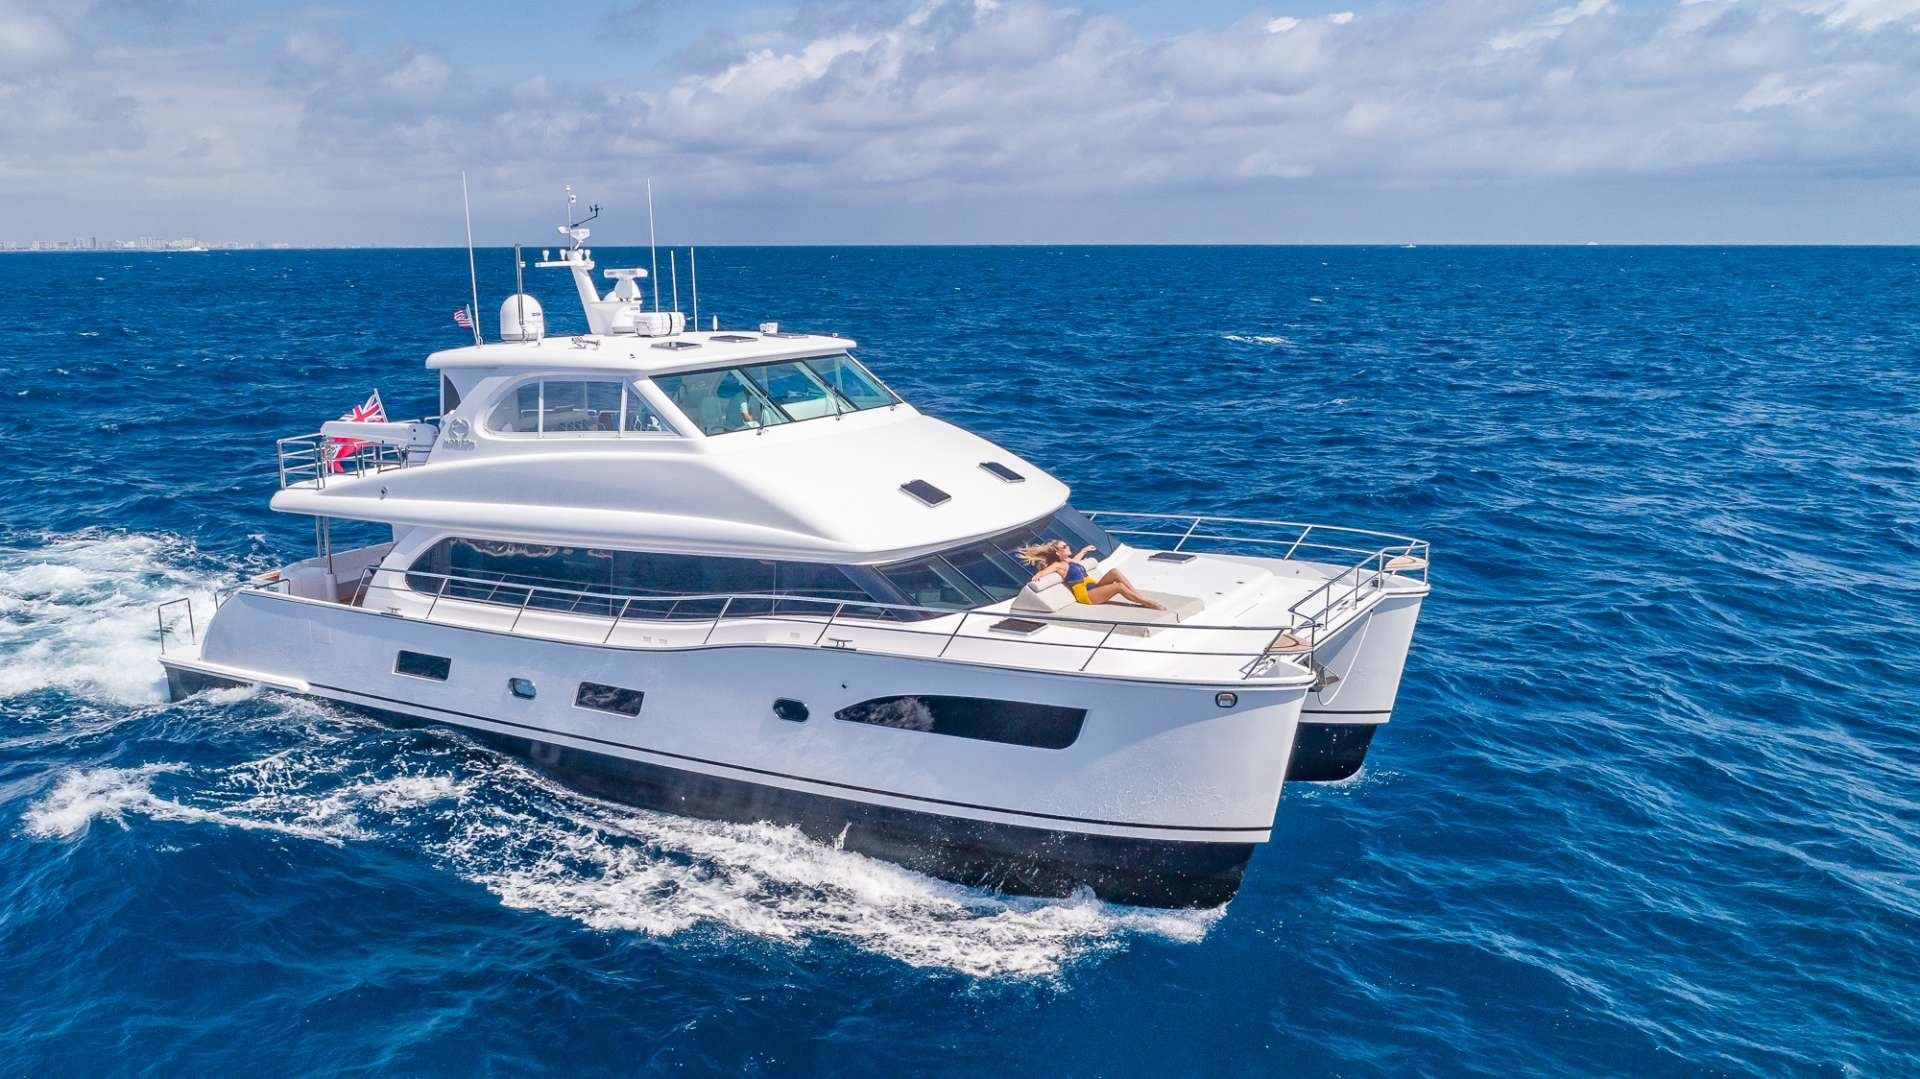 Mucho Gusto- Seaduction Yacht Charters